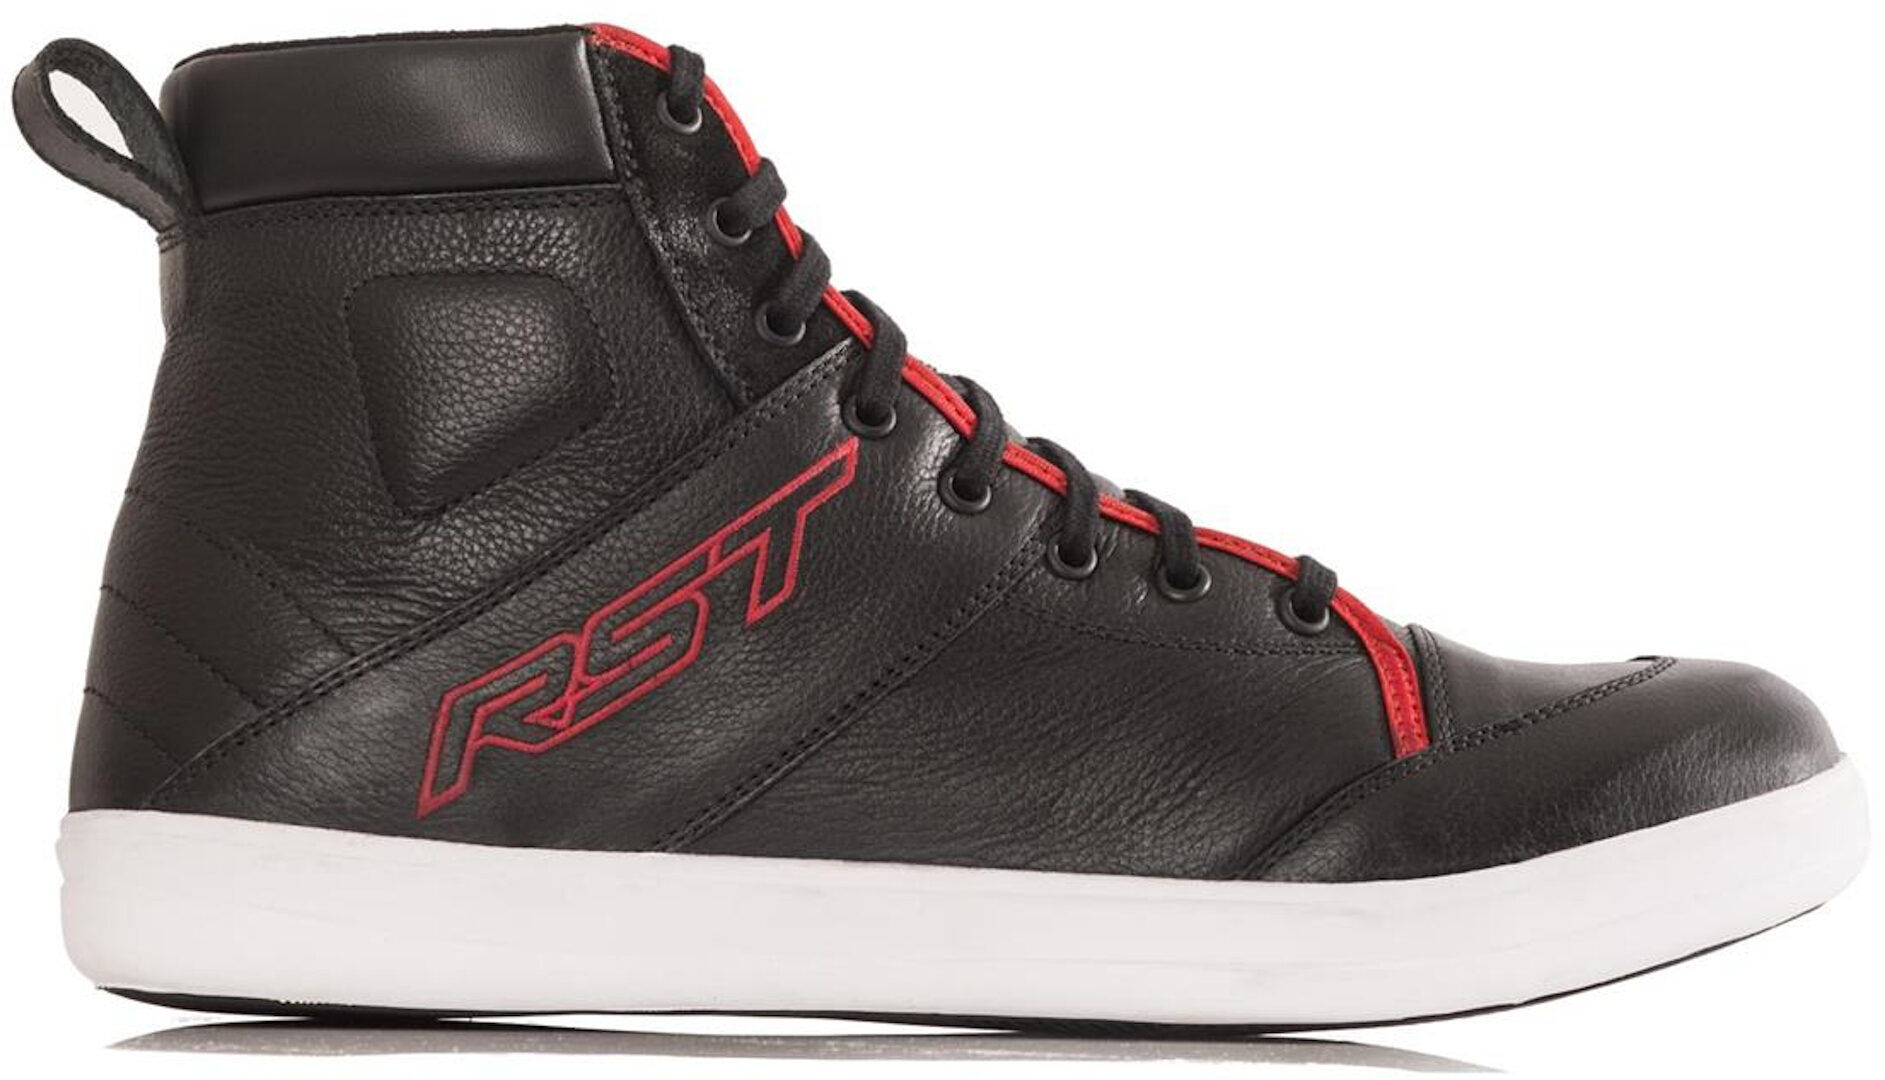 Rst Urban Ii Motorcycle Shoes  - Black Red